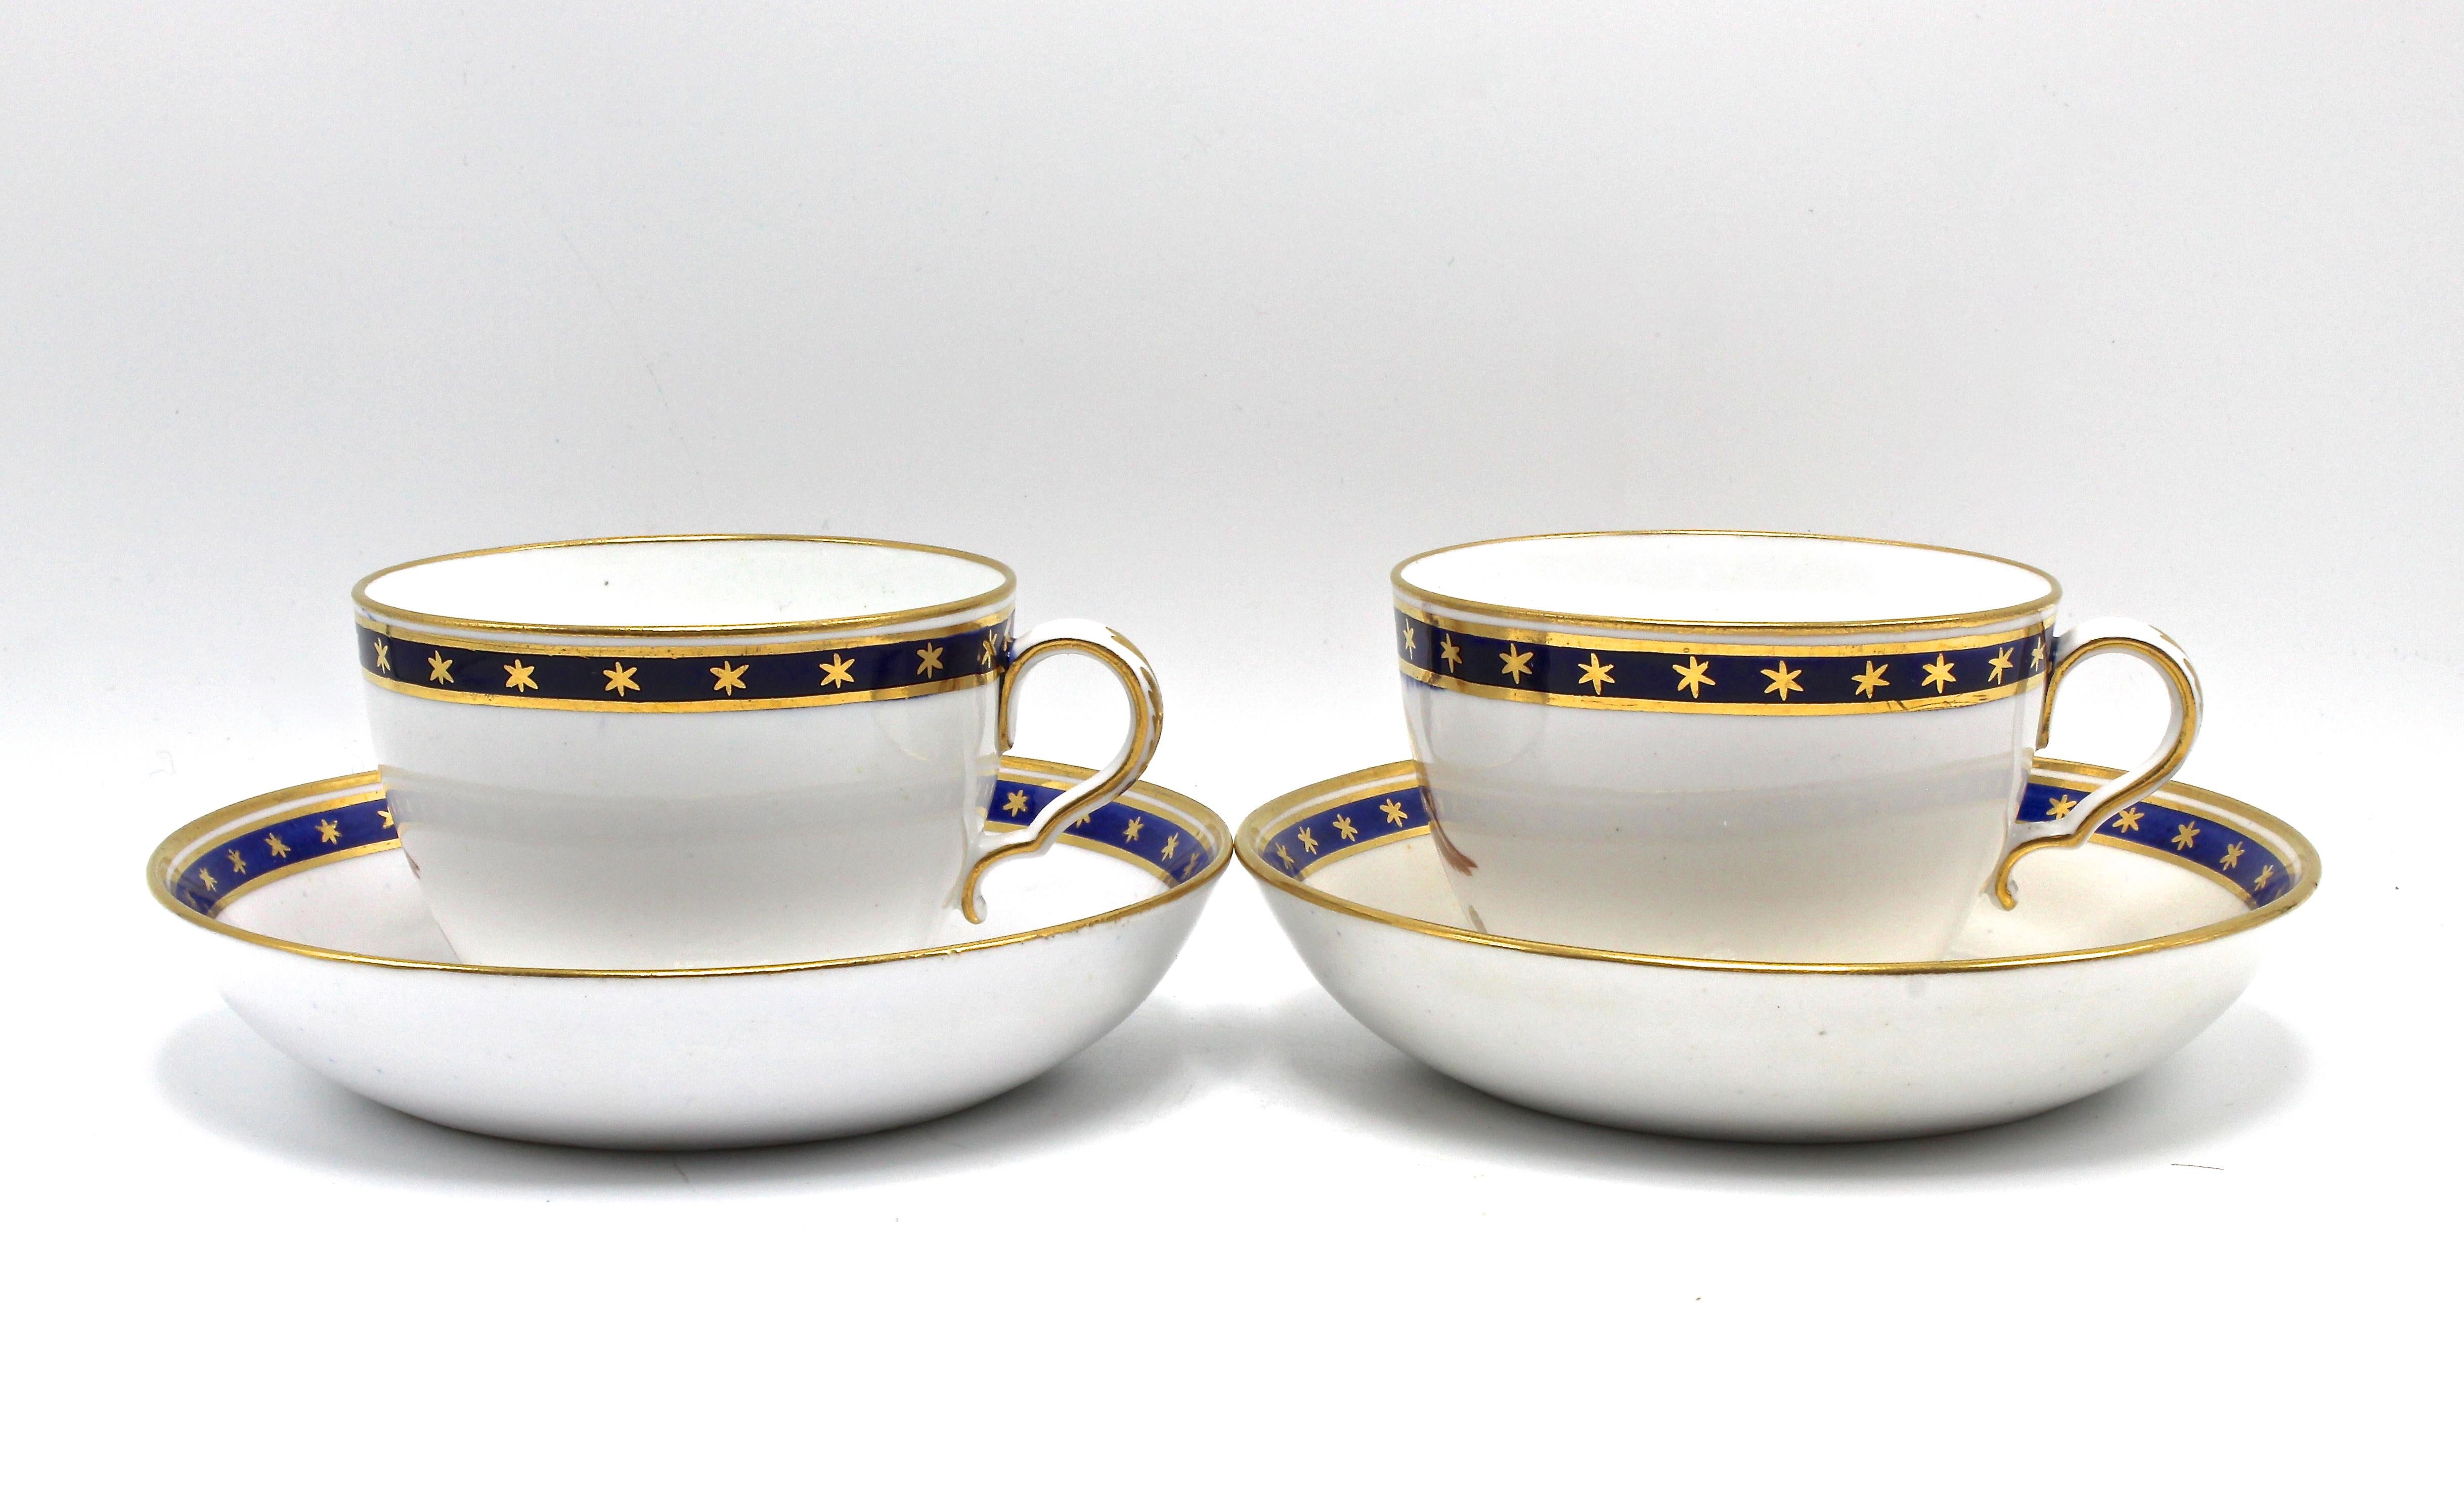 Early Victorian Pair of Patriotic American Eagle Teacups and Saucers, Circa 1840s